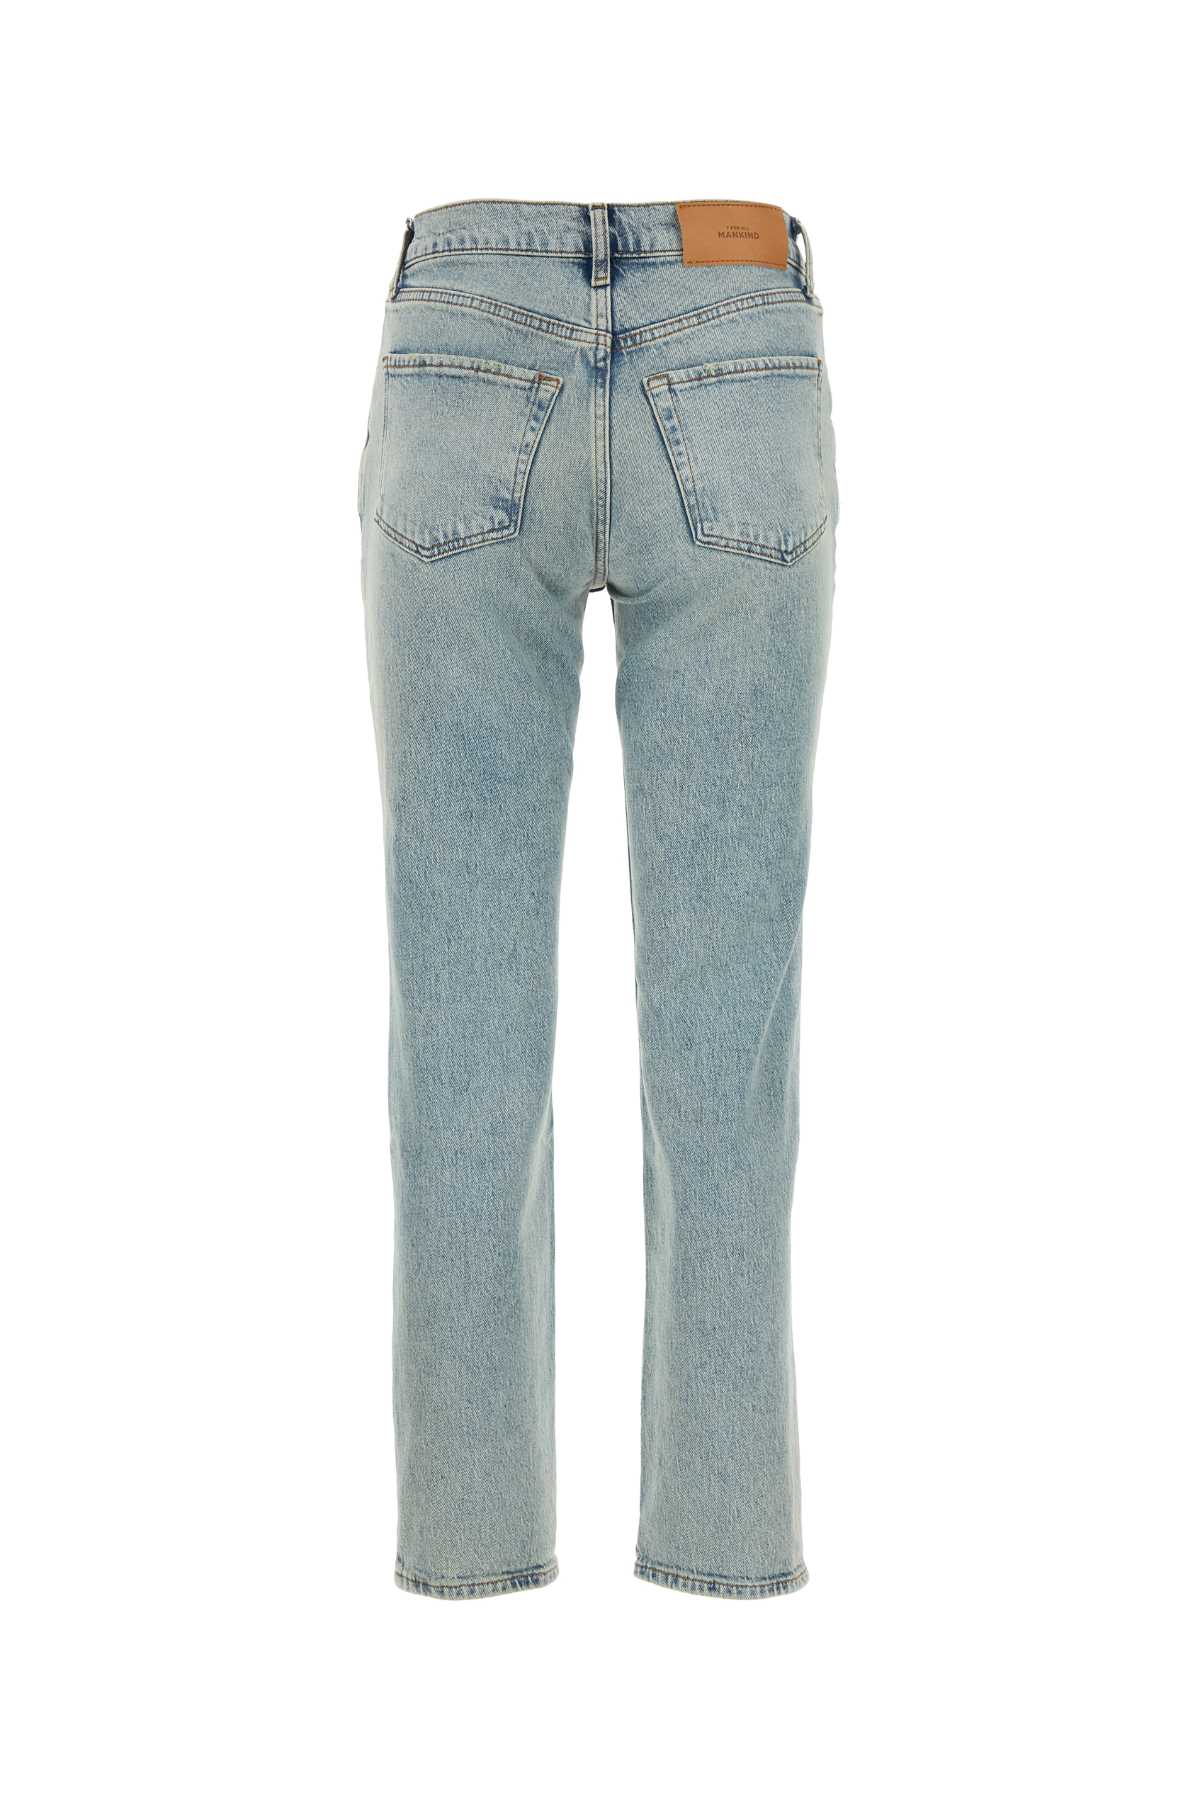 7 For All Mankind Light Blue Stretch Denim Jeans In Lavaggiothe